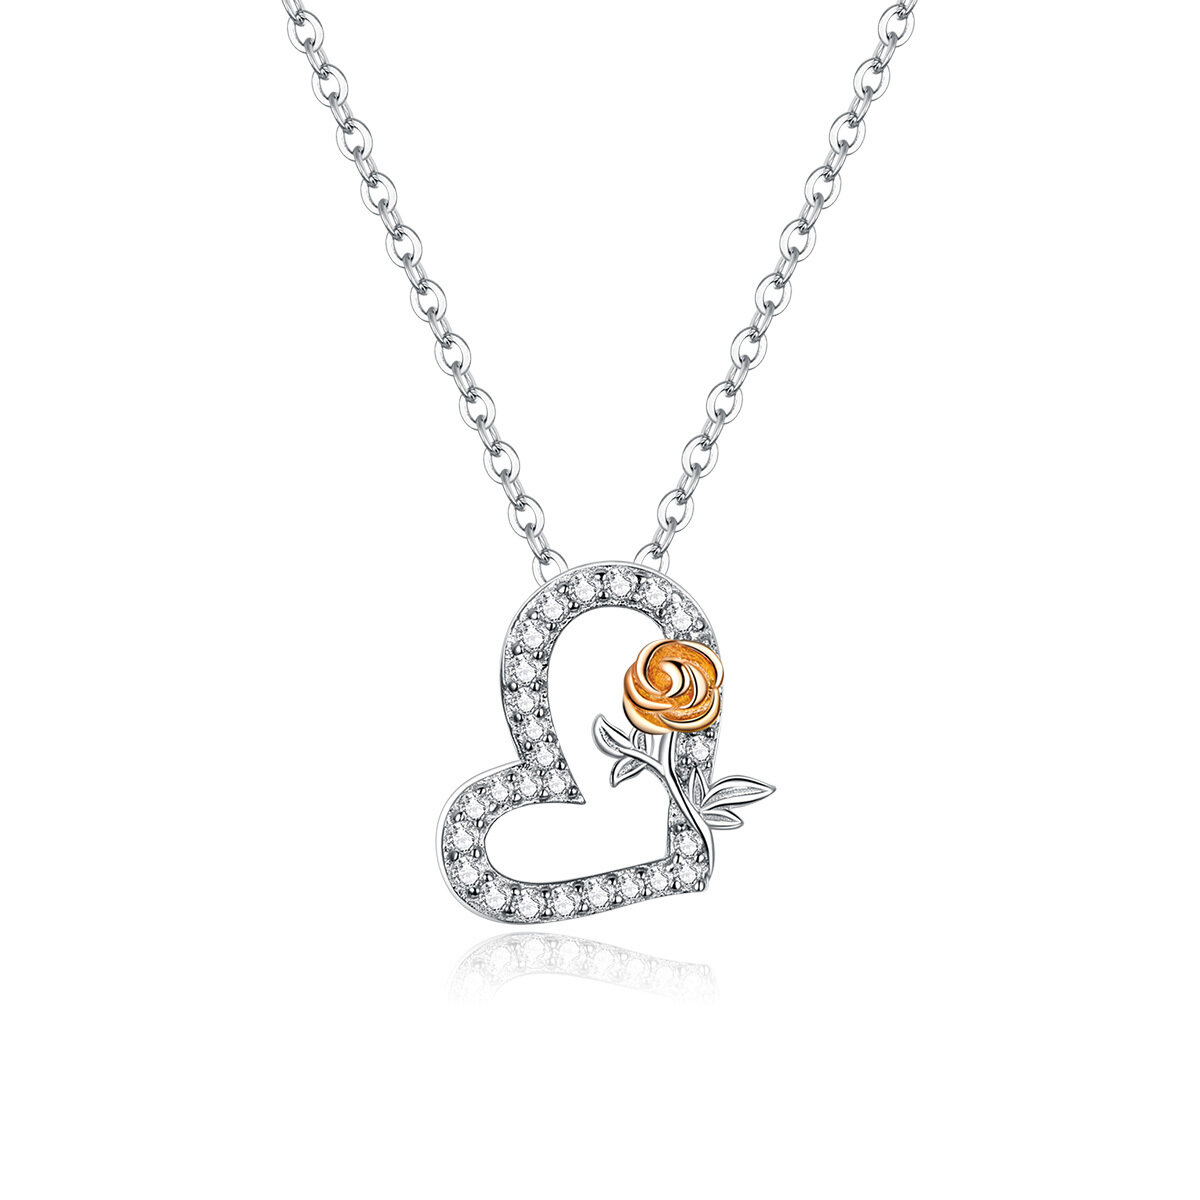 GemKing BSN132 the Rose S925 Sterling Silver Necklace